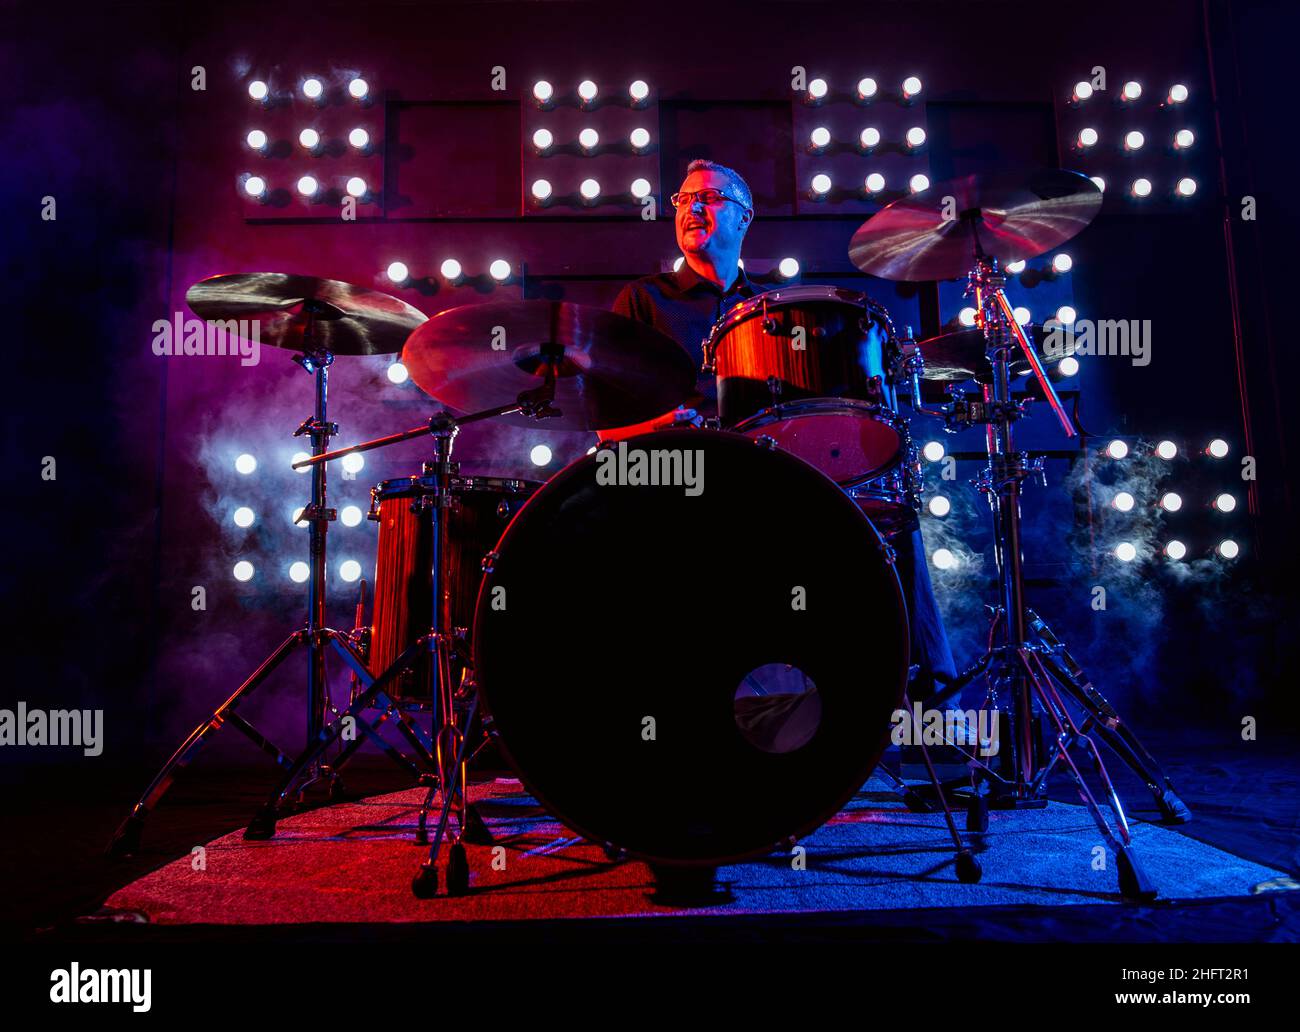 drummer performing in front of audience blinder Stock Photo